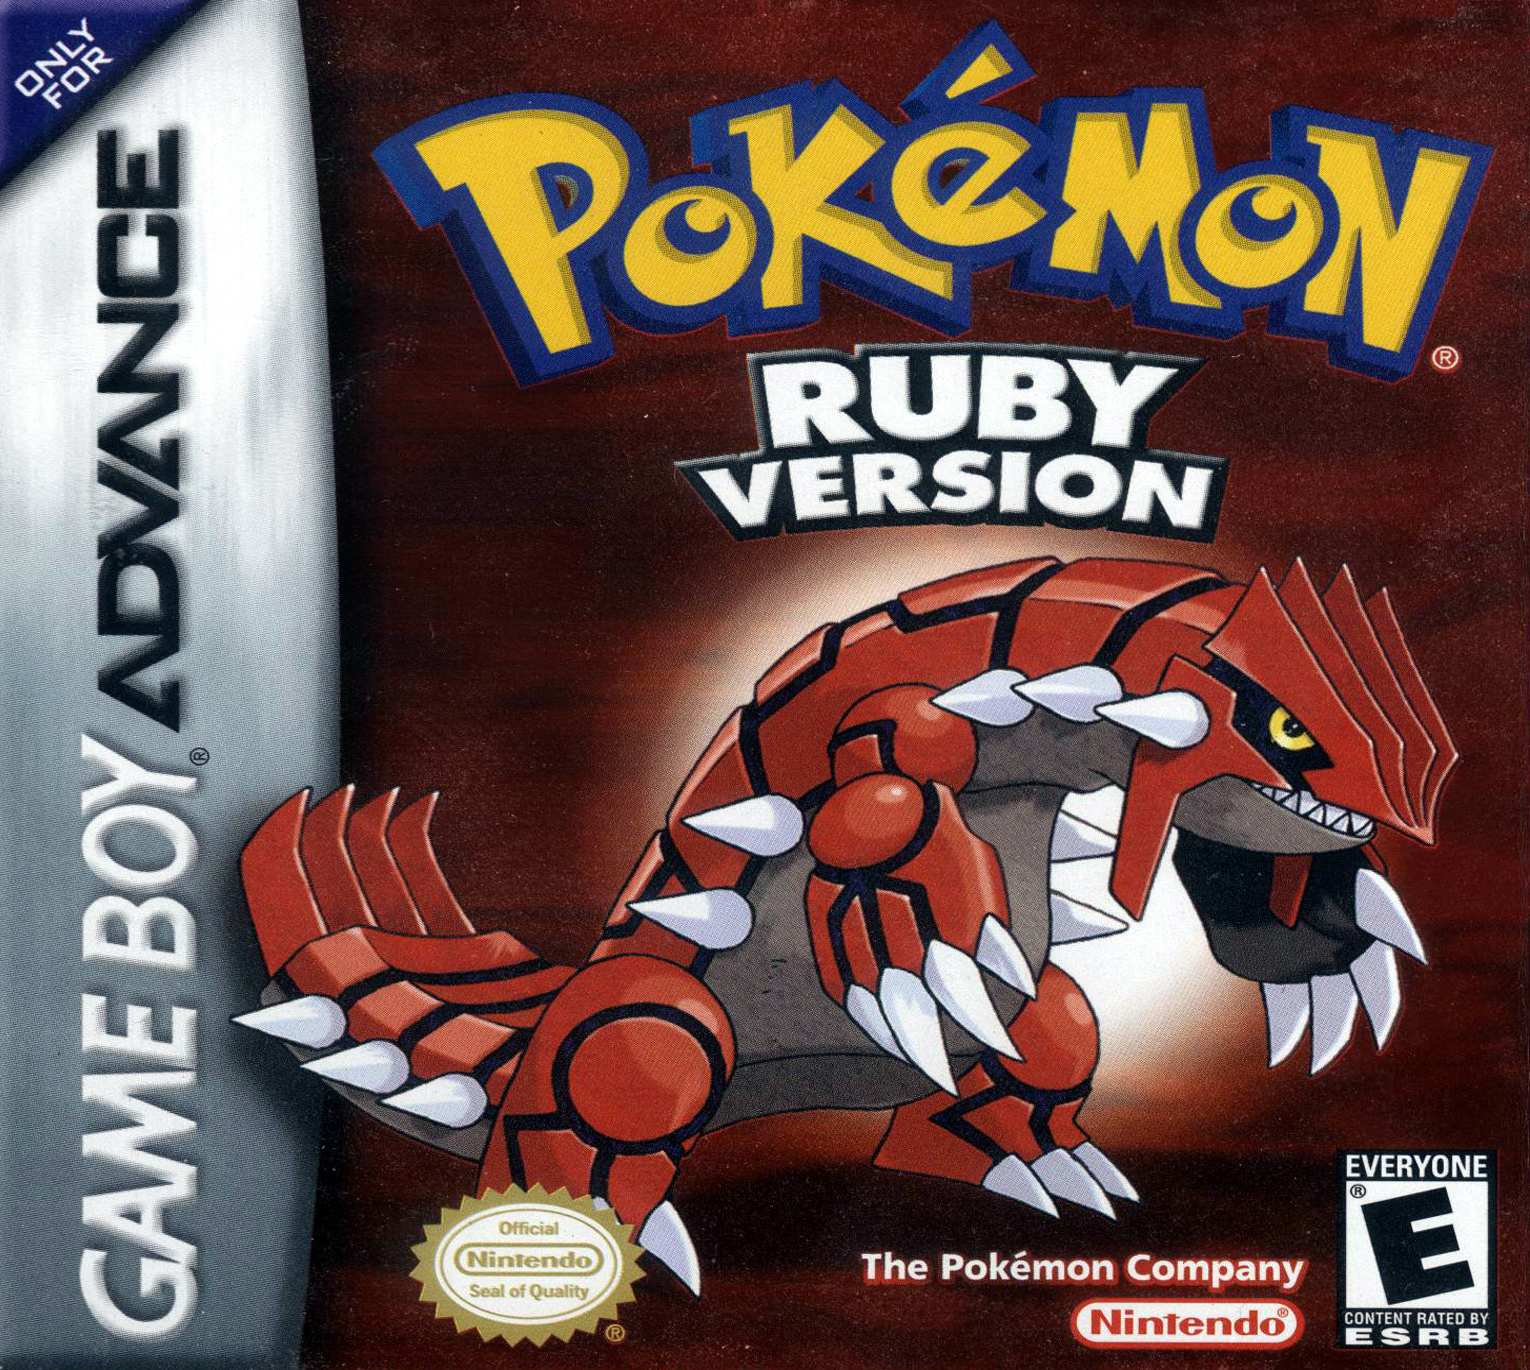 pokemon games for switch ruby version download